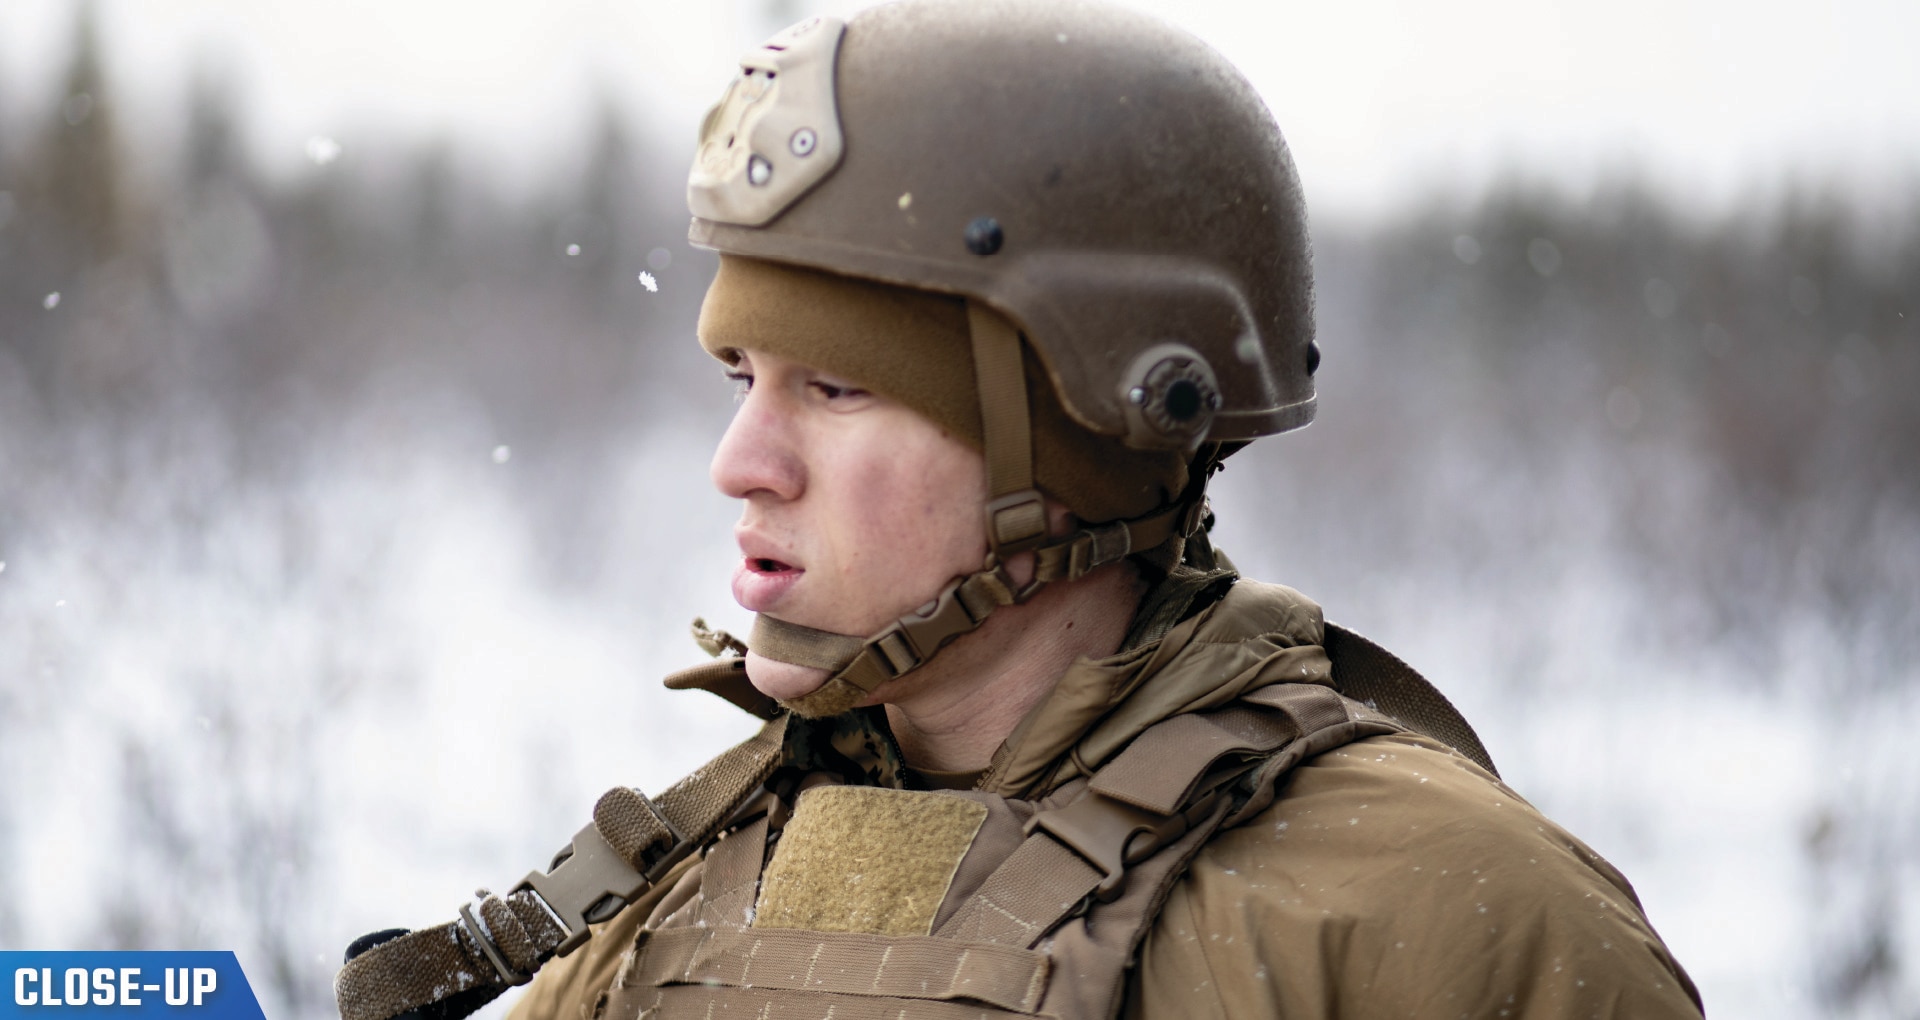 U.S. Marine Corps Lance Cpl. in gear standing in snow.